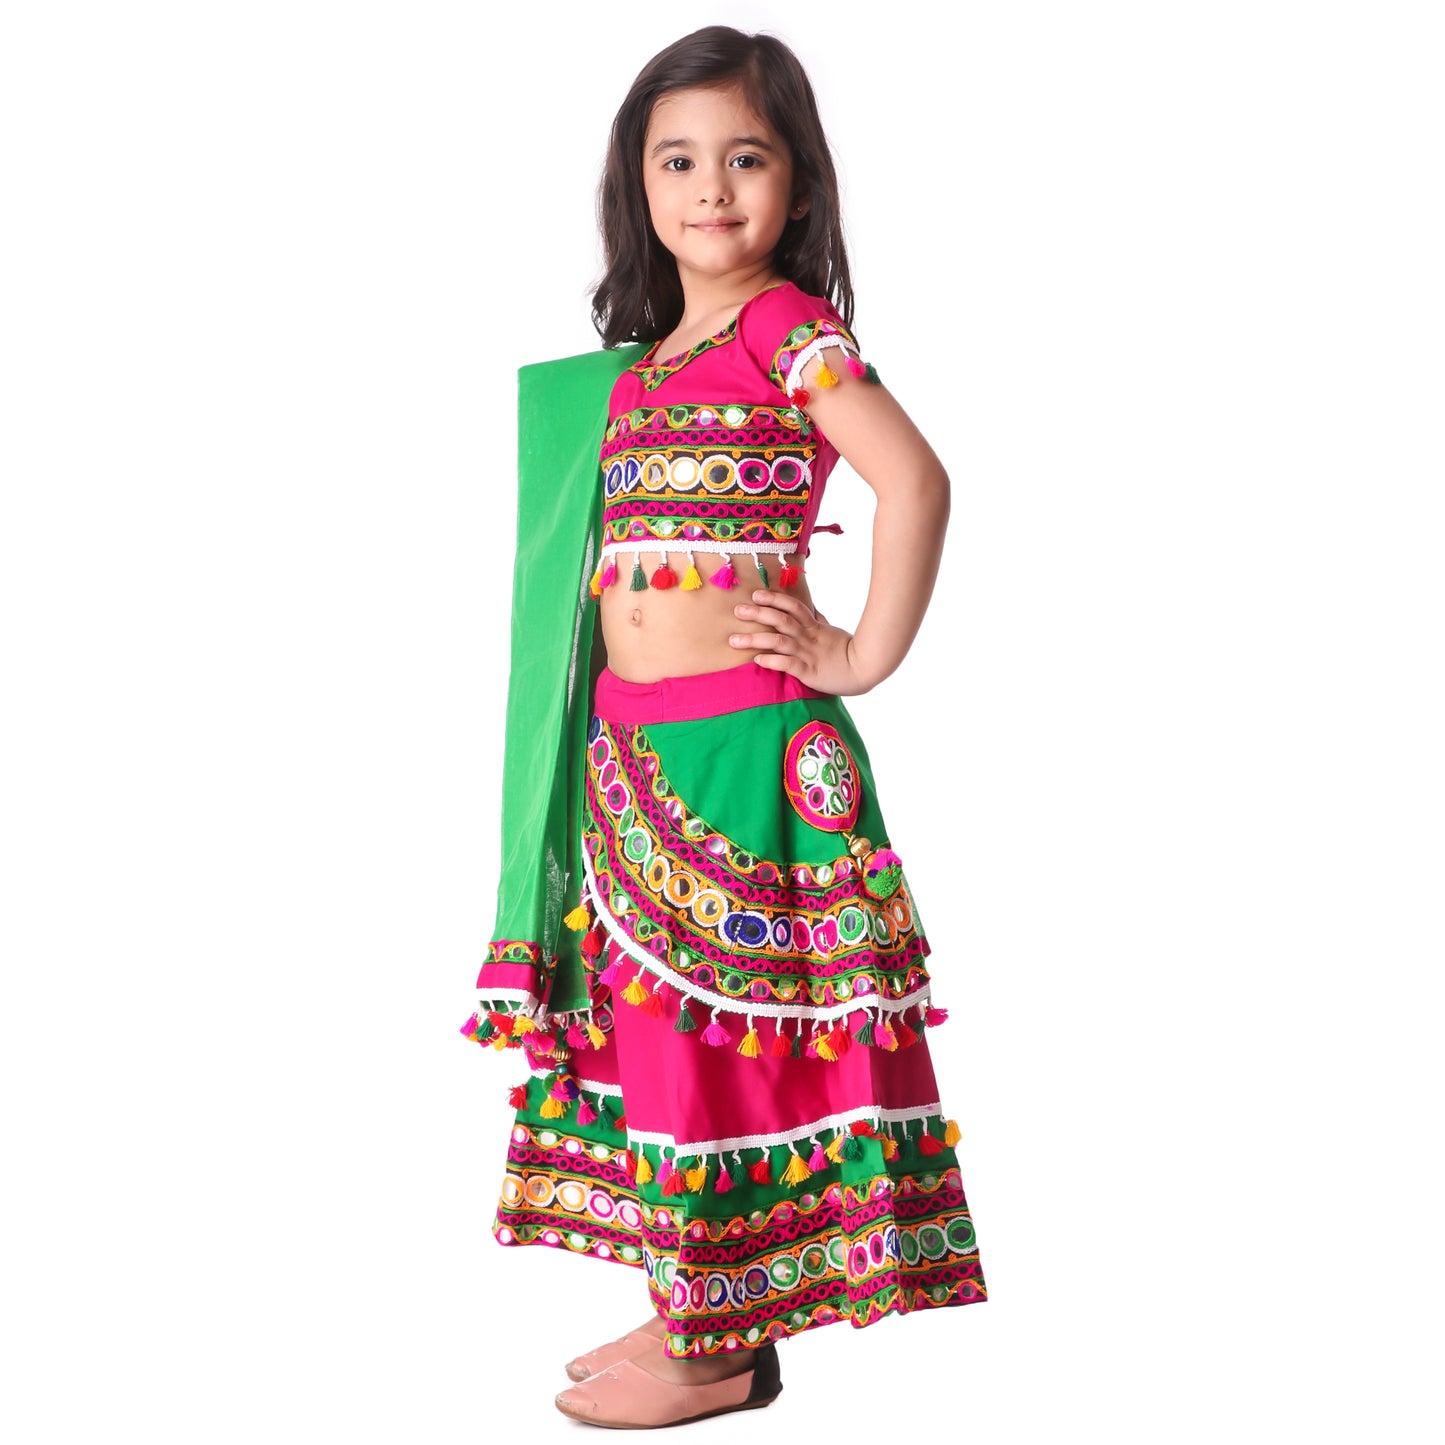 Multicolor Pink and Green Lehenga Choli for Girls - Ages 0-16Y - Kutch Work